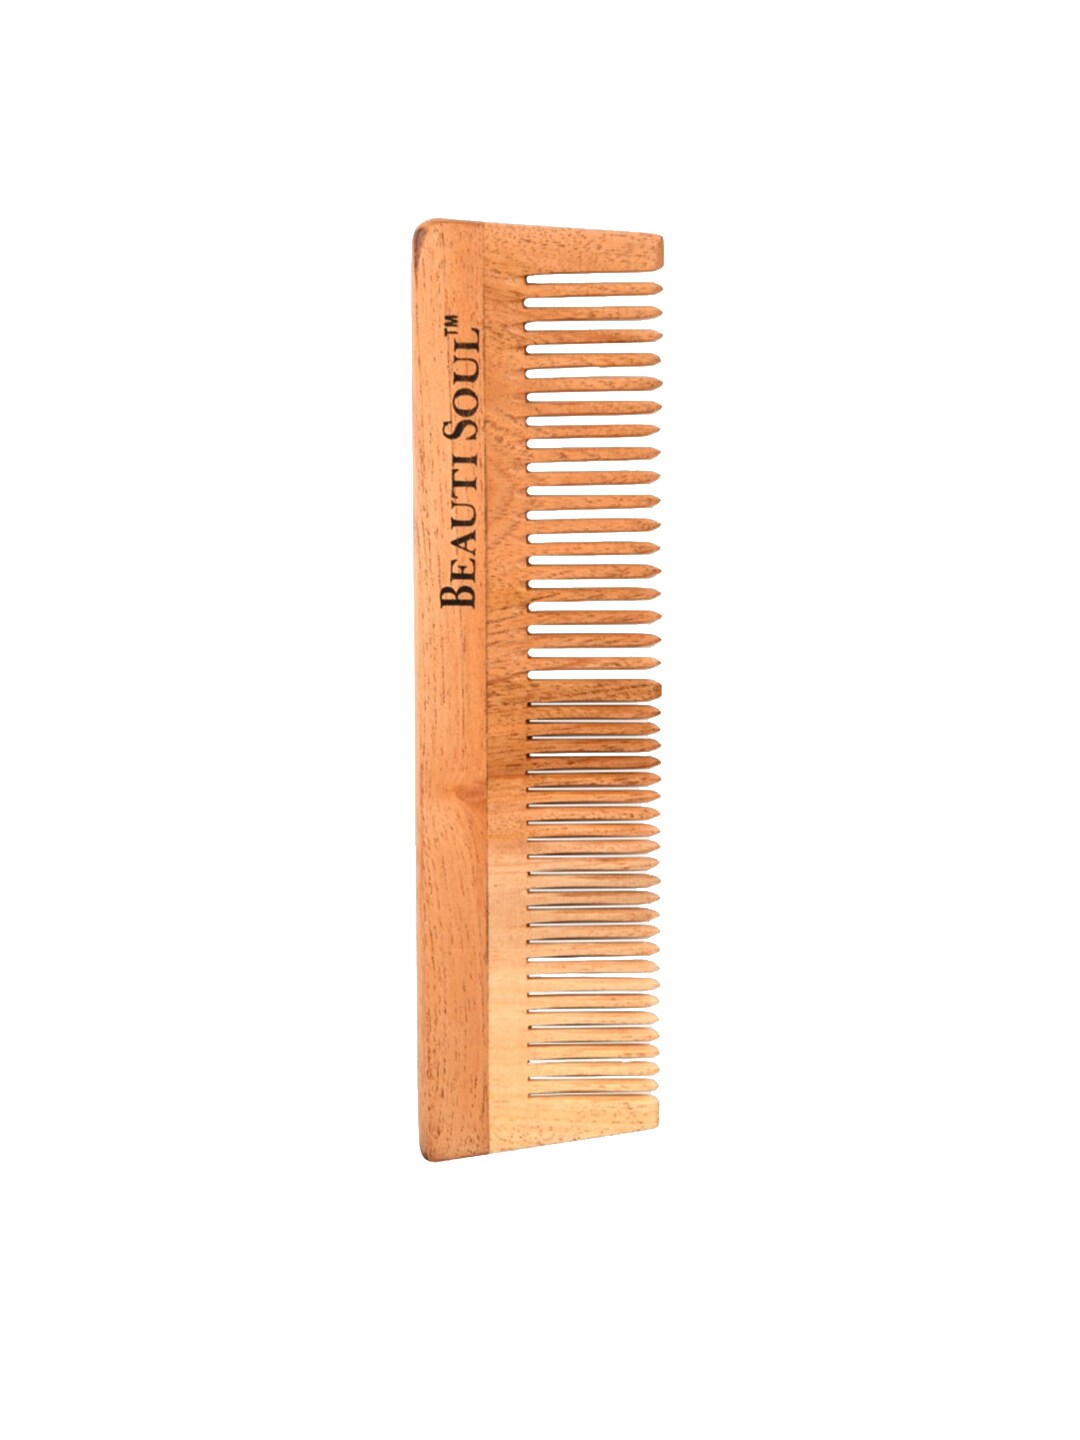 Beautisoul Brown Lily Wood Comb Price in India